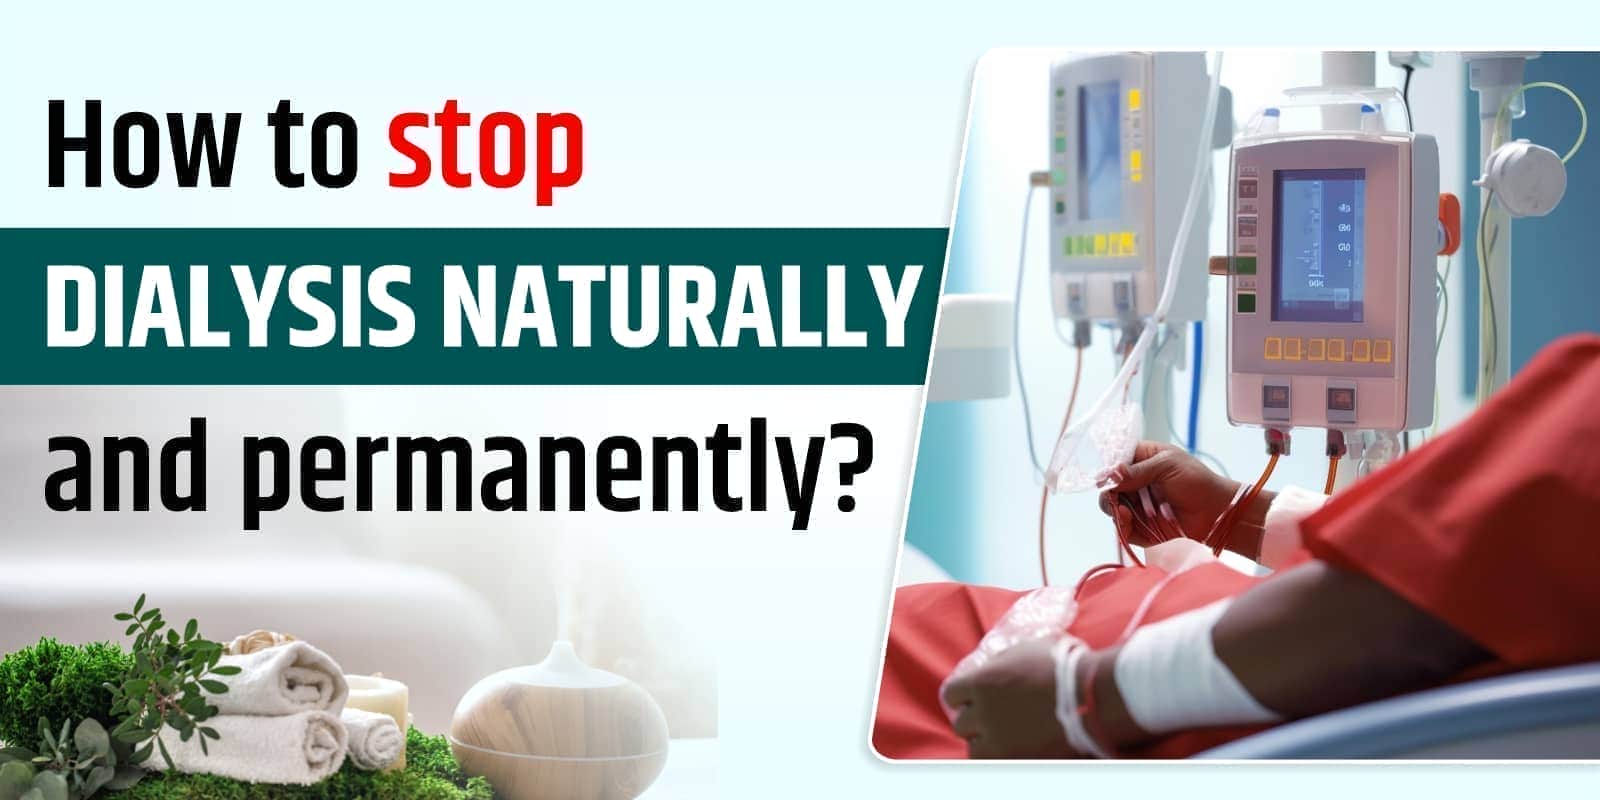 How to stop dialysis naturally and permanently?